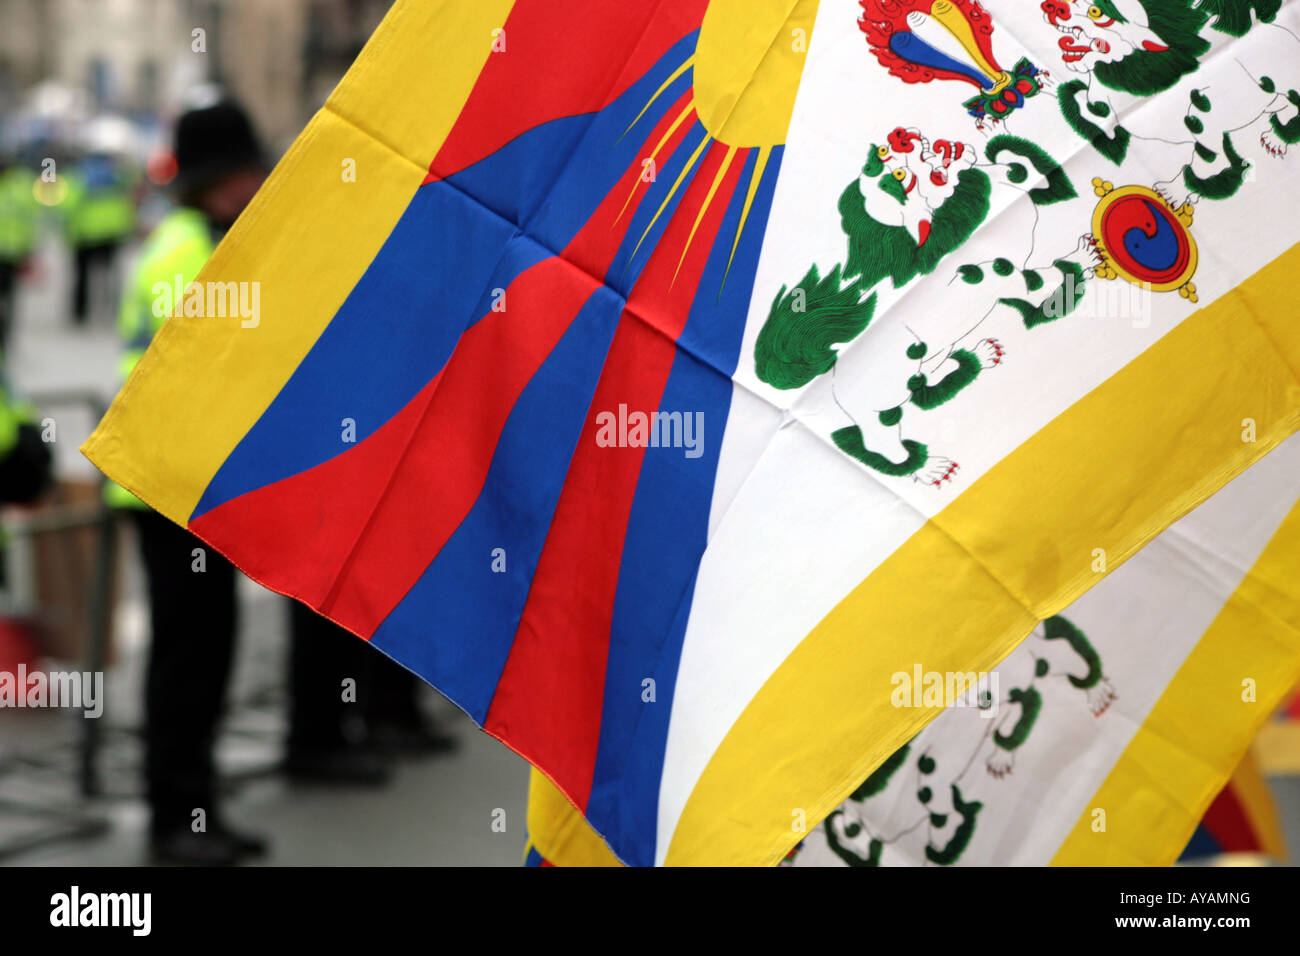 Flag of Tibet flies at demonstration in Whitehall during the passage of the Olympic Games torch through London Stock Photo